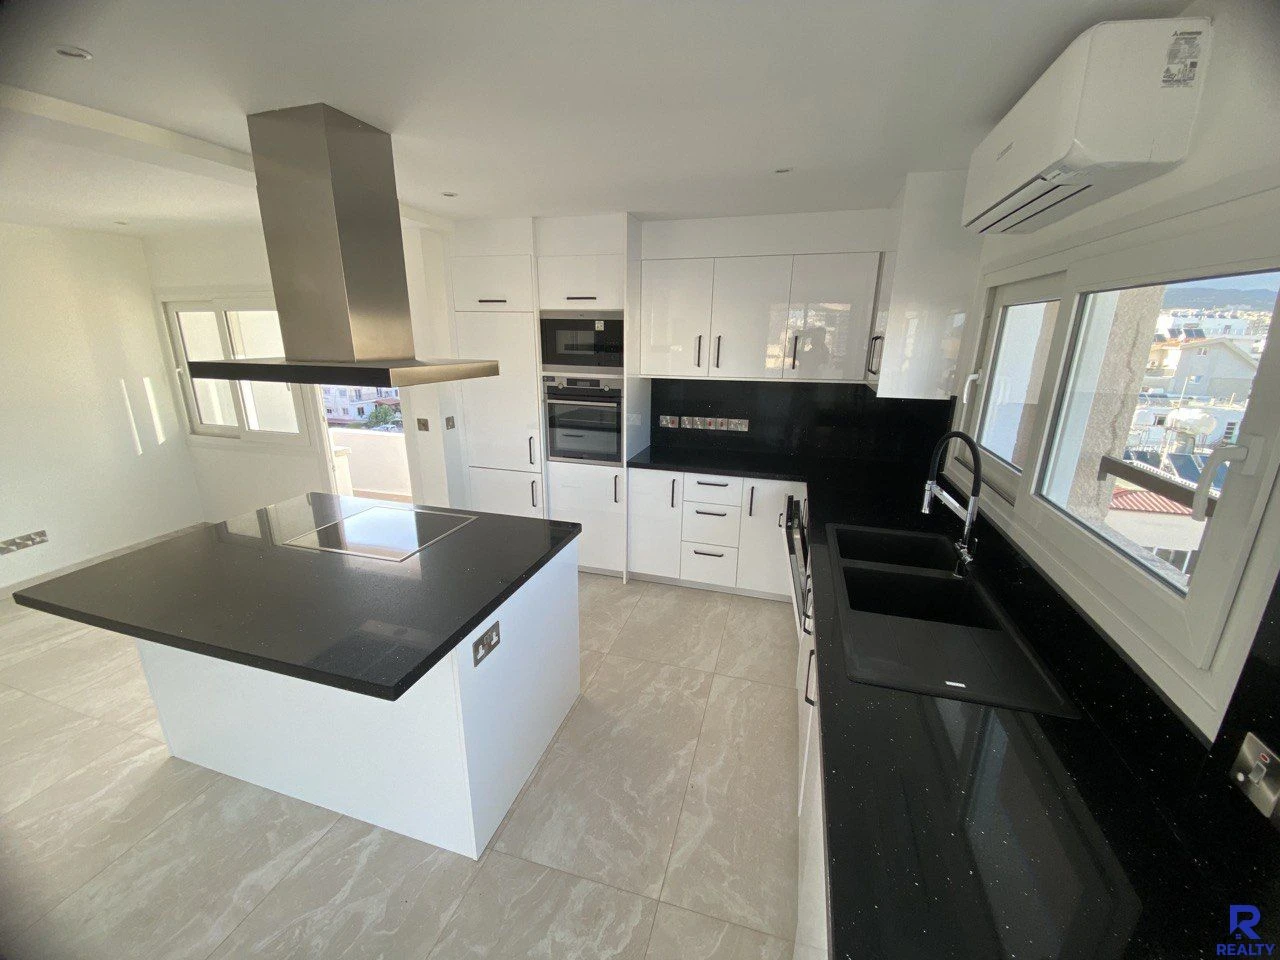 3BD Apartment with a Spacious Kitchen, image 1